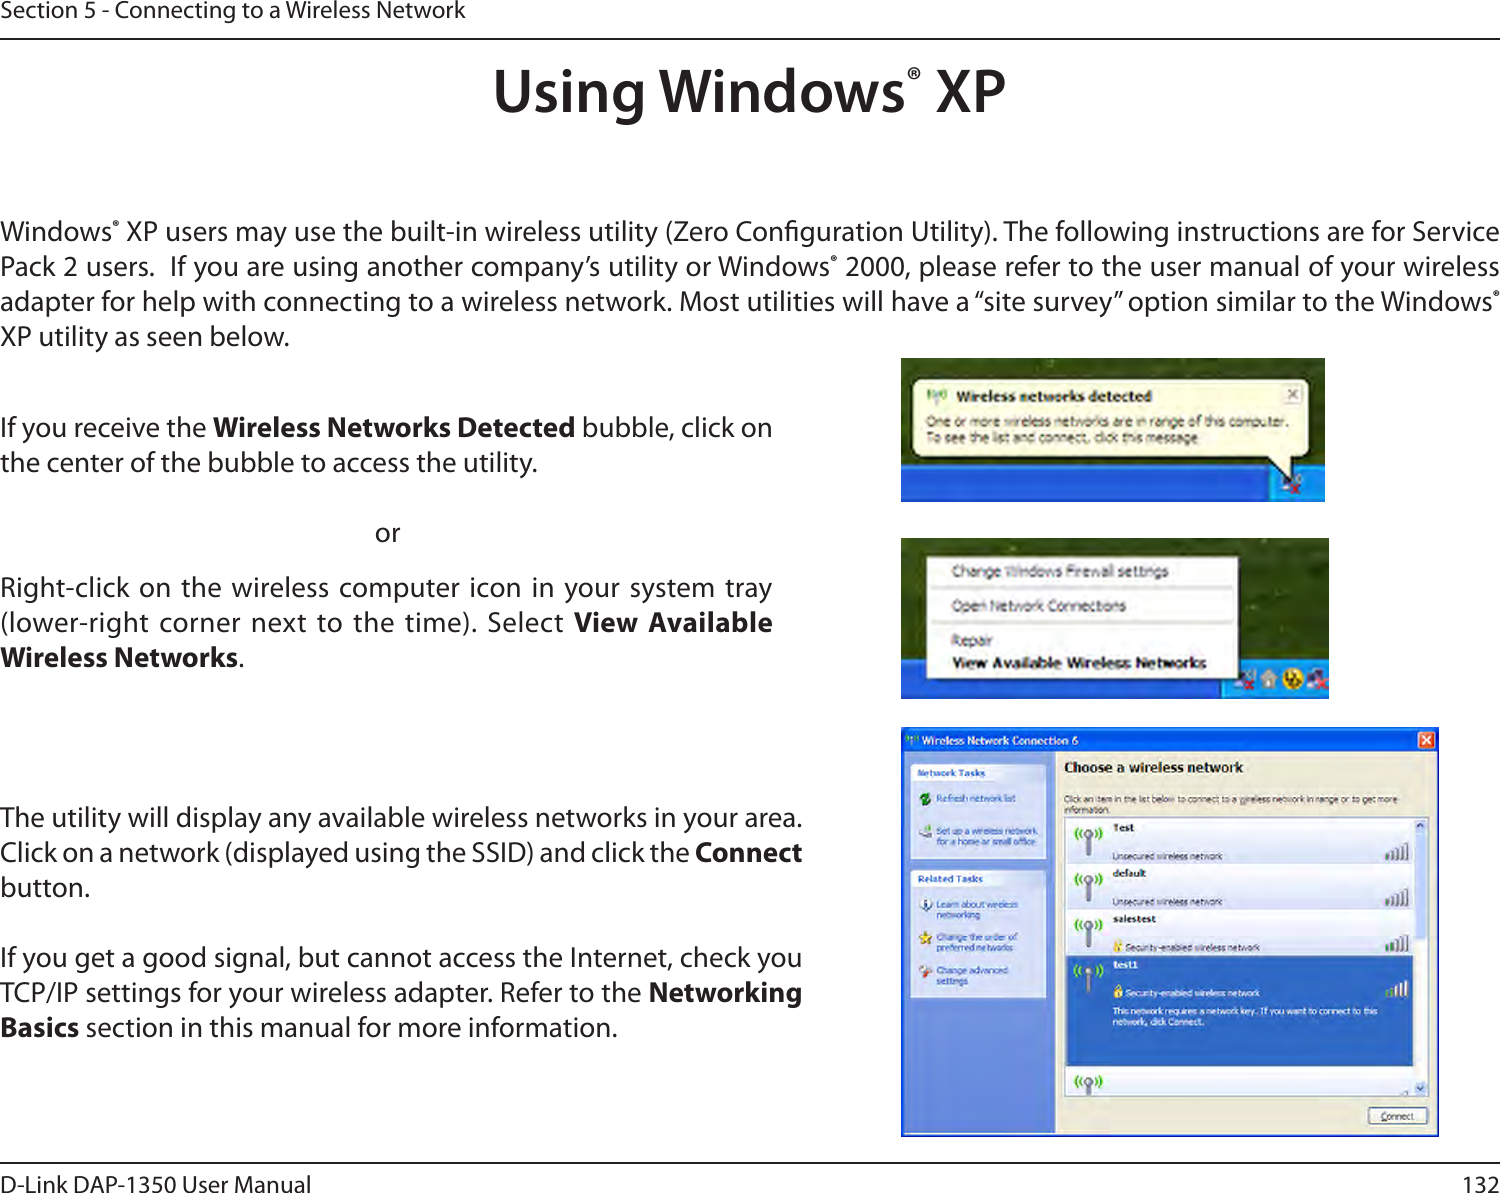 132D-Link DAP-1350 User ManualSection 5 - Connecting to a Wireless NetworkUsing Windows® XPWindows® XP users may use the built-in wireless utility (Zero Conguration Utility). The following instructions are for Service Pack 2 users.  If you are using another company’s utility or Windows® 2000, please refer to the user manual of your wireless adapter for help with connecting to a wireless network. Most utilities will have a “site survey” option similar to the Windows® XP utility as seen below.Right-click on the wireless computer icon in your system tray (lower-right corner next to the time). Select View Available Wireless Networks.If you receive the Wireless Networks Detected bubble, click on the center of the bubble to access the utility.     orThe utility will display any available wireless networks in your area. Click on a network (displayed using the SSID) and click the Connect button.If you get a good signal, but cannot access the Internet, check you TCP/IP settings for your wireless adapter. Refer to the Networking Basics section in this manual for more information.